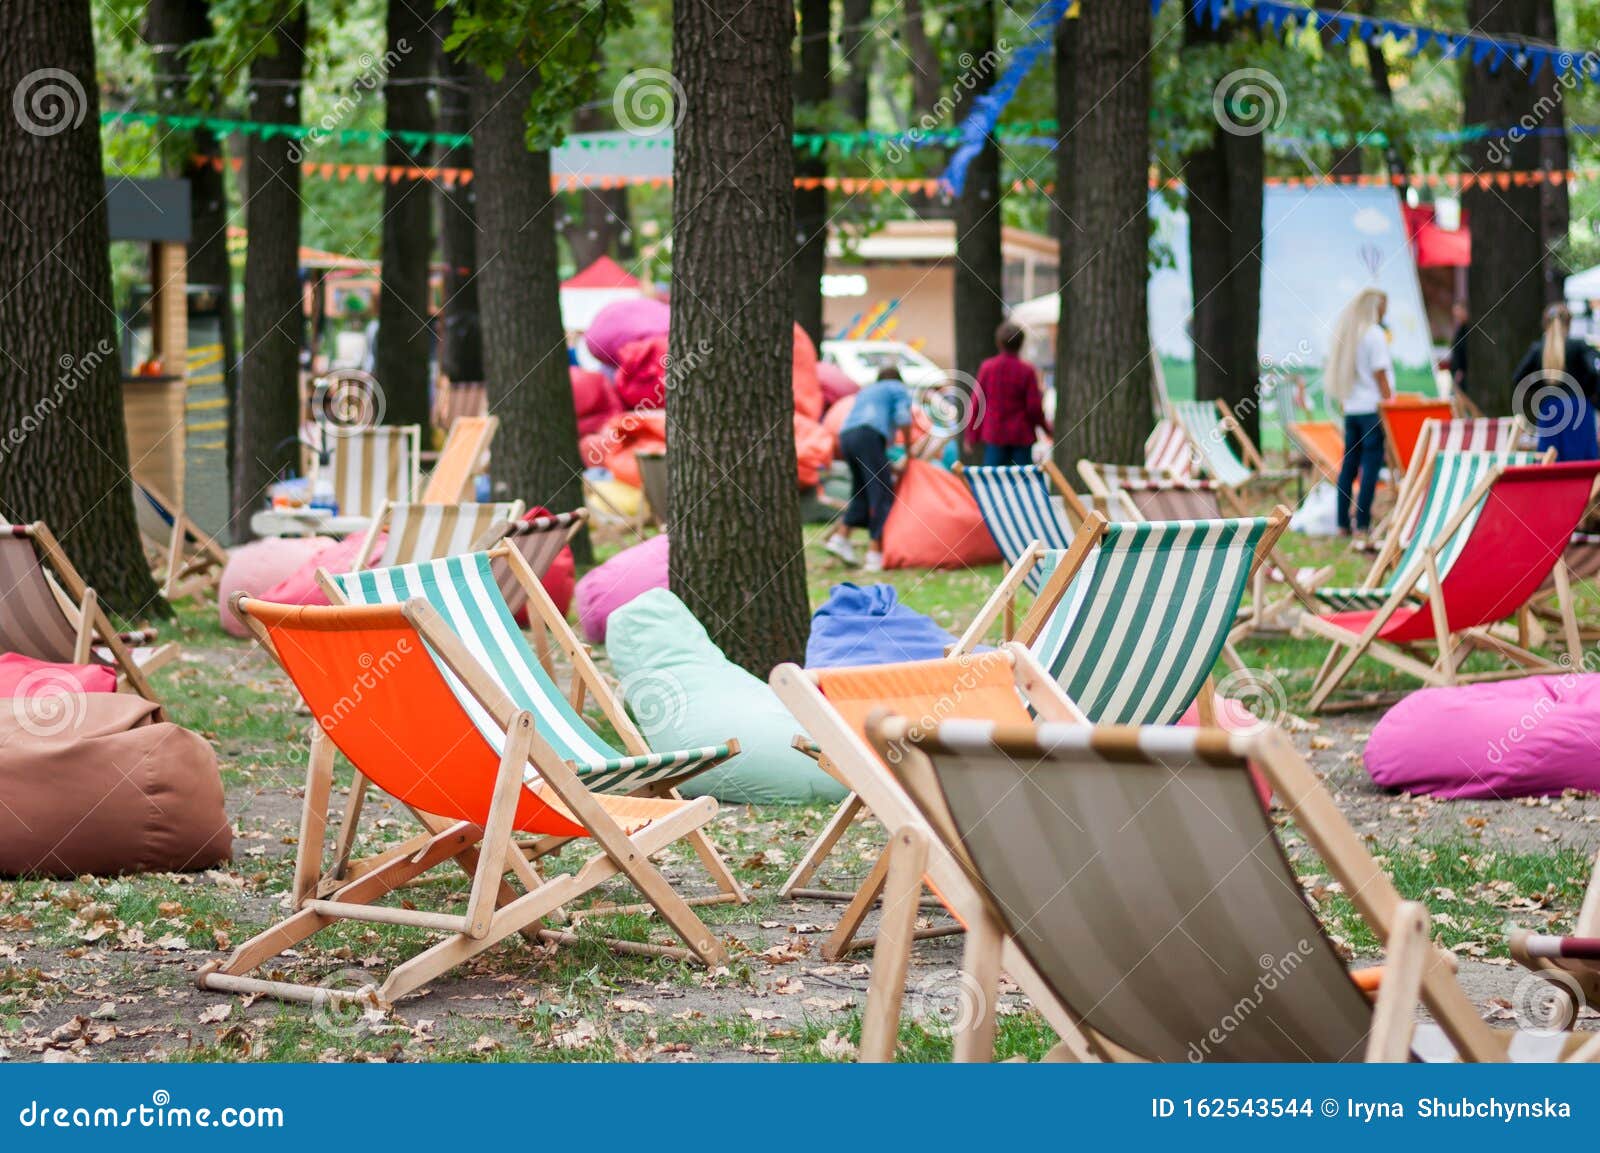 Outdoor Recreation Area With A Many Colorful Soft Chair Bags Wooden Tables And Striped Folding Wooden Chairs In A Park Stock Photo Image Of Area Beautiful 162543544